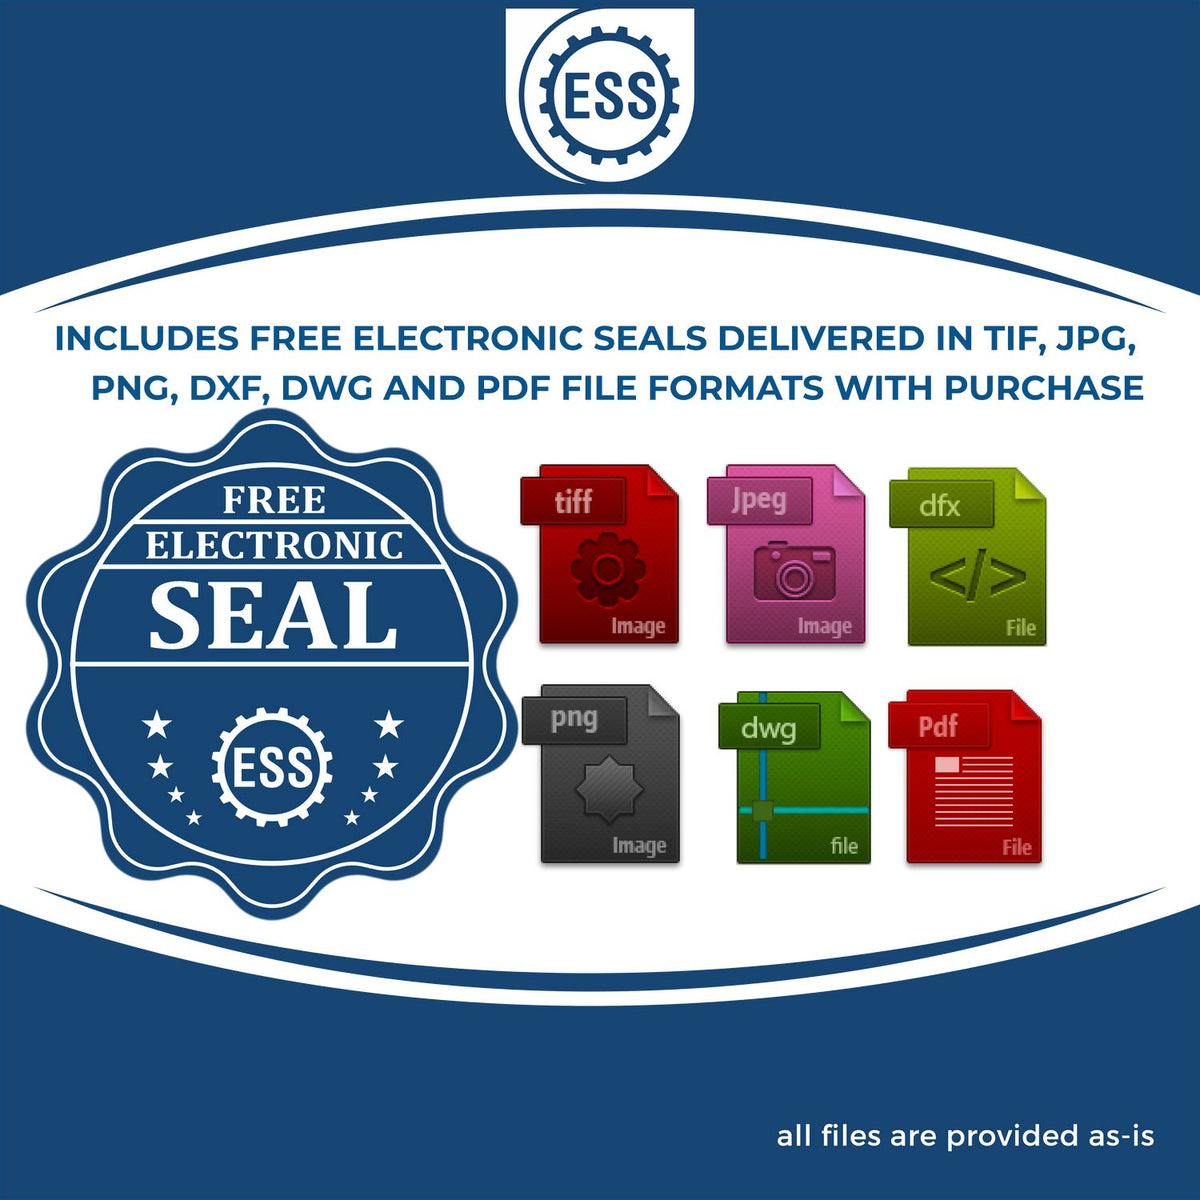 An infographic for the free electronic seal for the MaxLight Premium Pre-Inked Oklahoma State Seal Notarial Stamp illustrating the different file type icons such as DXF, DWG, TIF, JPG and PNG.